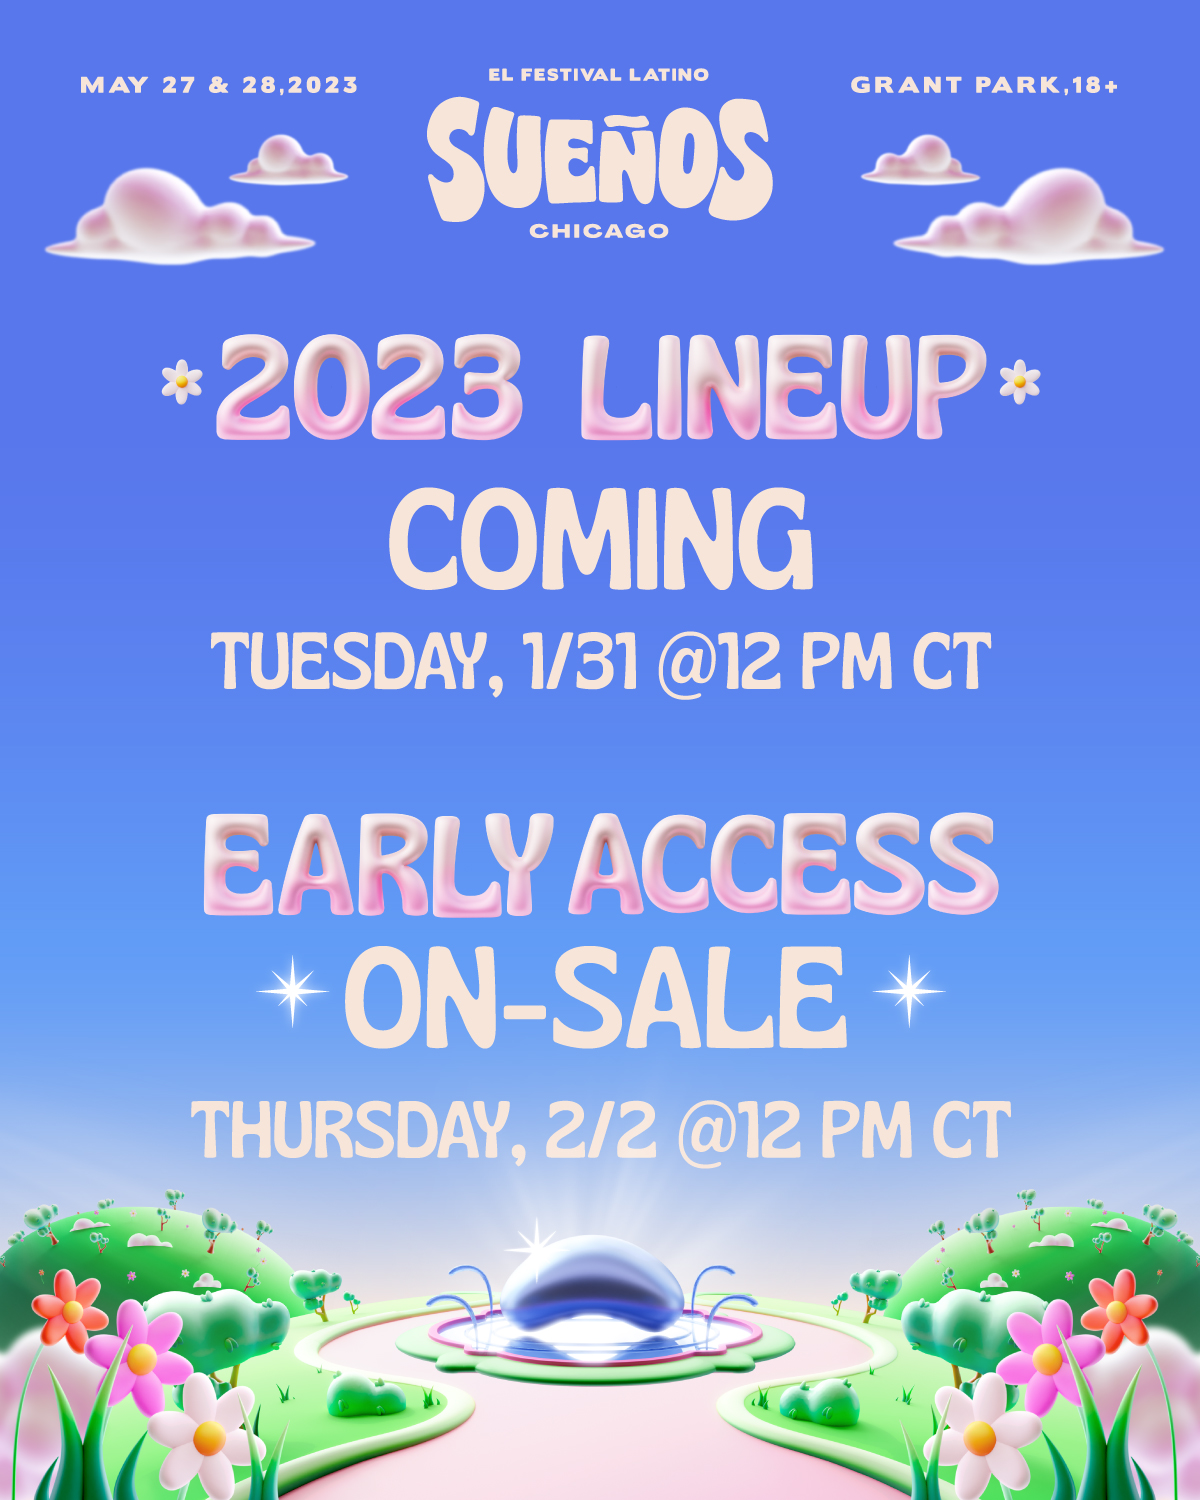 Sueños Lineup To Be Announced Tuesday, January 31st Grooveist